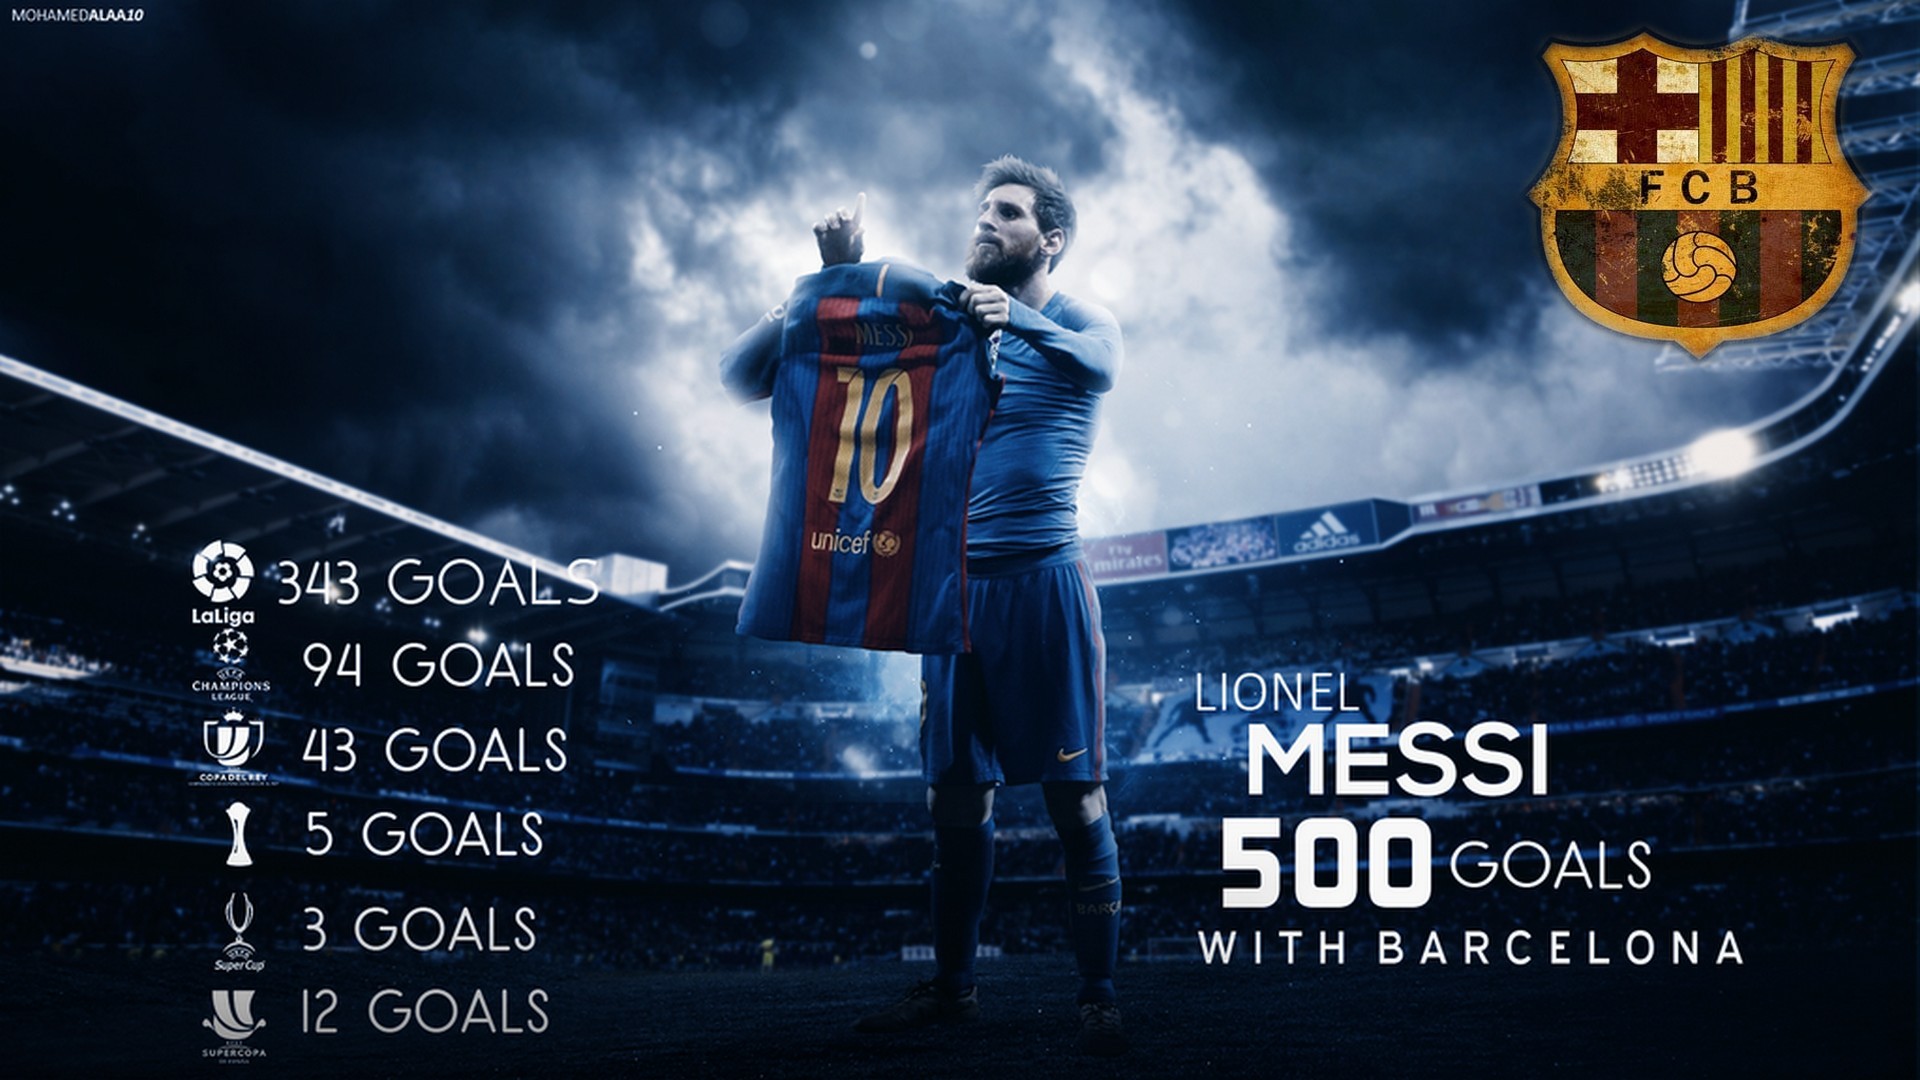 Messi HD Wallpapers With Resolution 1920X1080 pixel. You can make this wallpaper for your Mac or Windows Desktop Background, iPhone, Android or Tablet and another Smartphone device for free